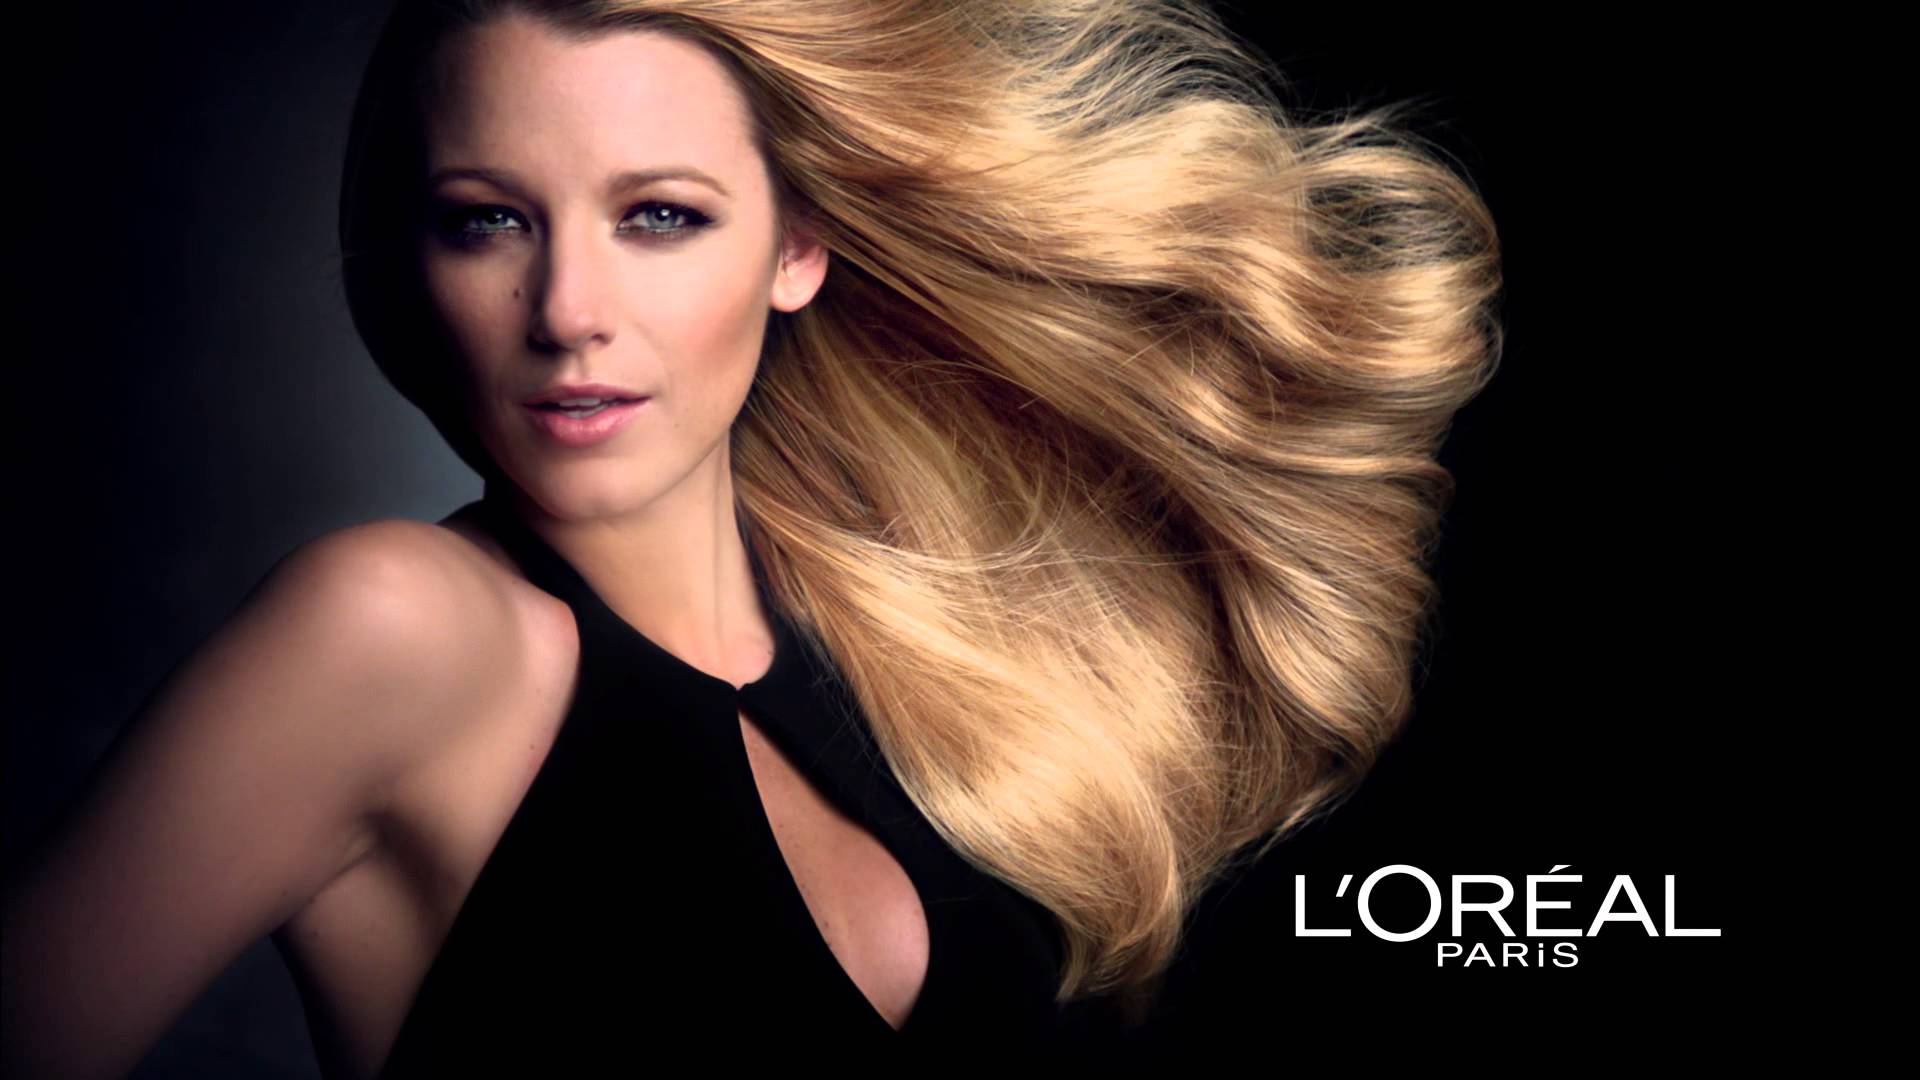 L'Oreal advertising banner image with Blake Lively